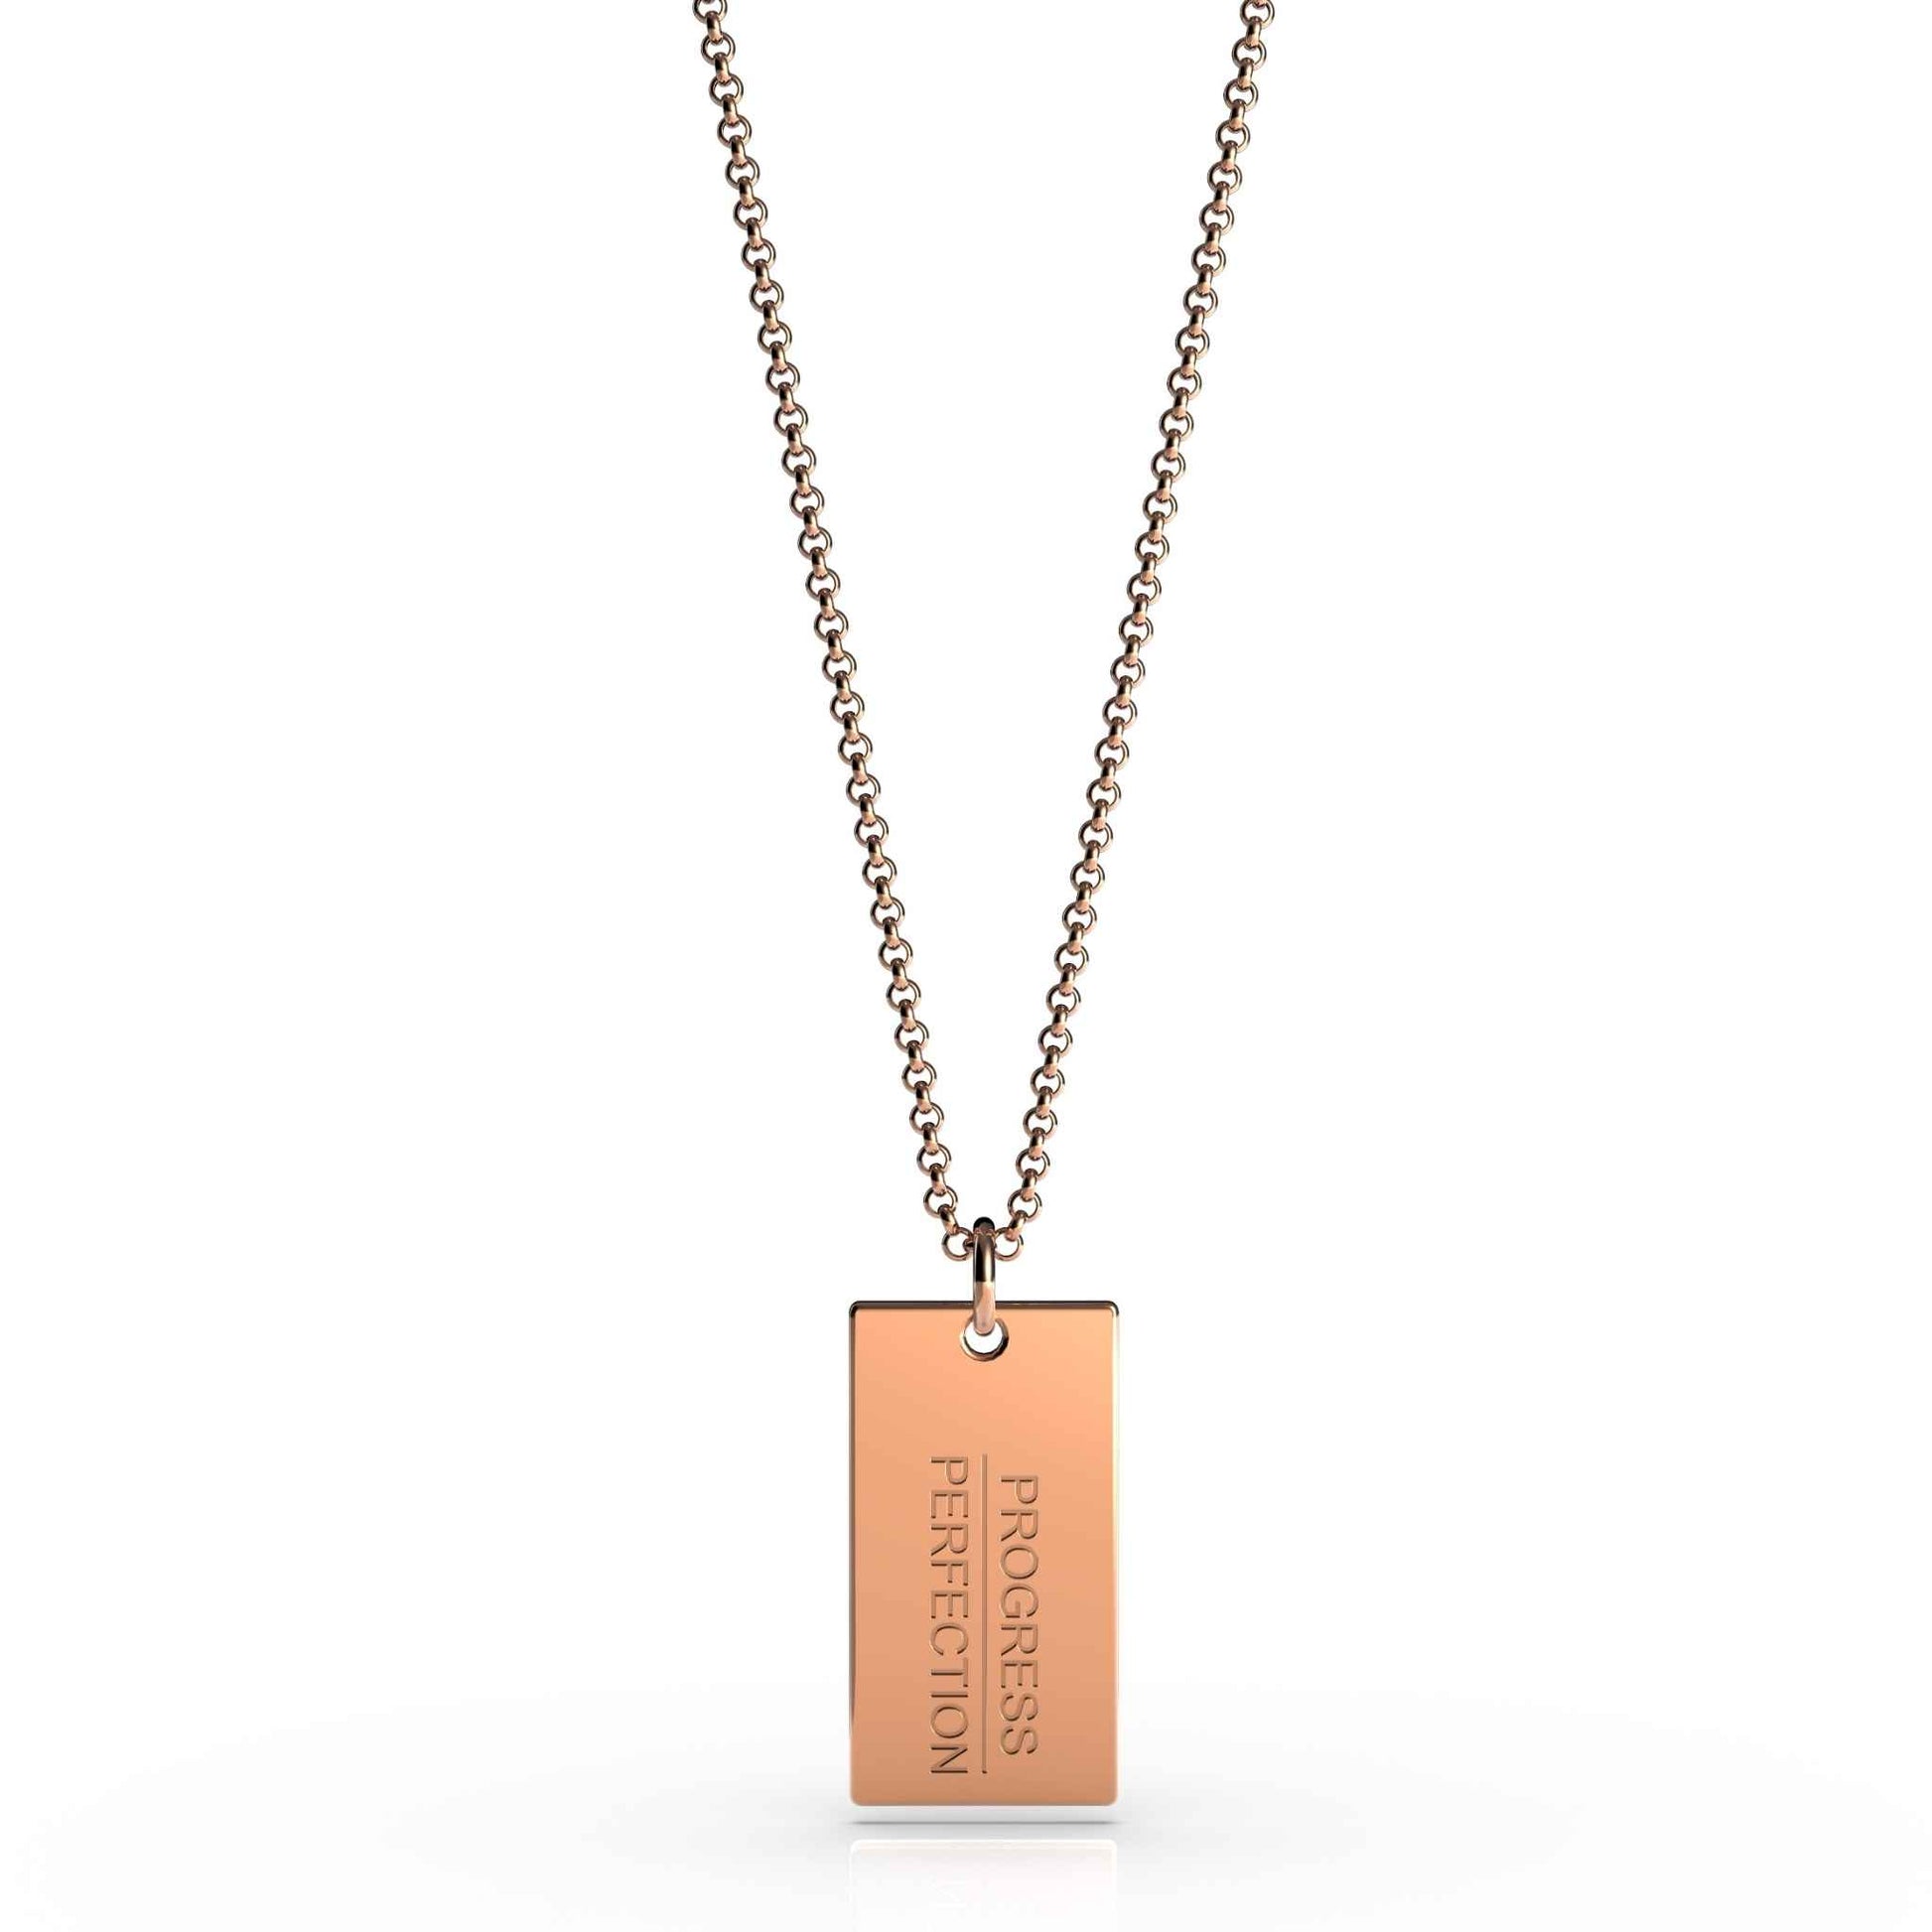 Progress Over Perfection Necklace | Necklaces | The Ovl Collection